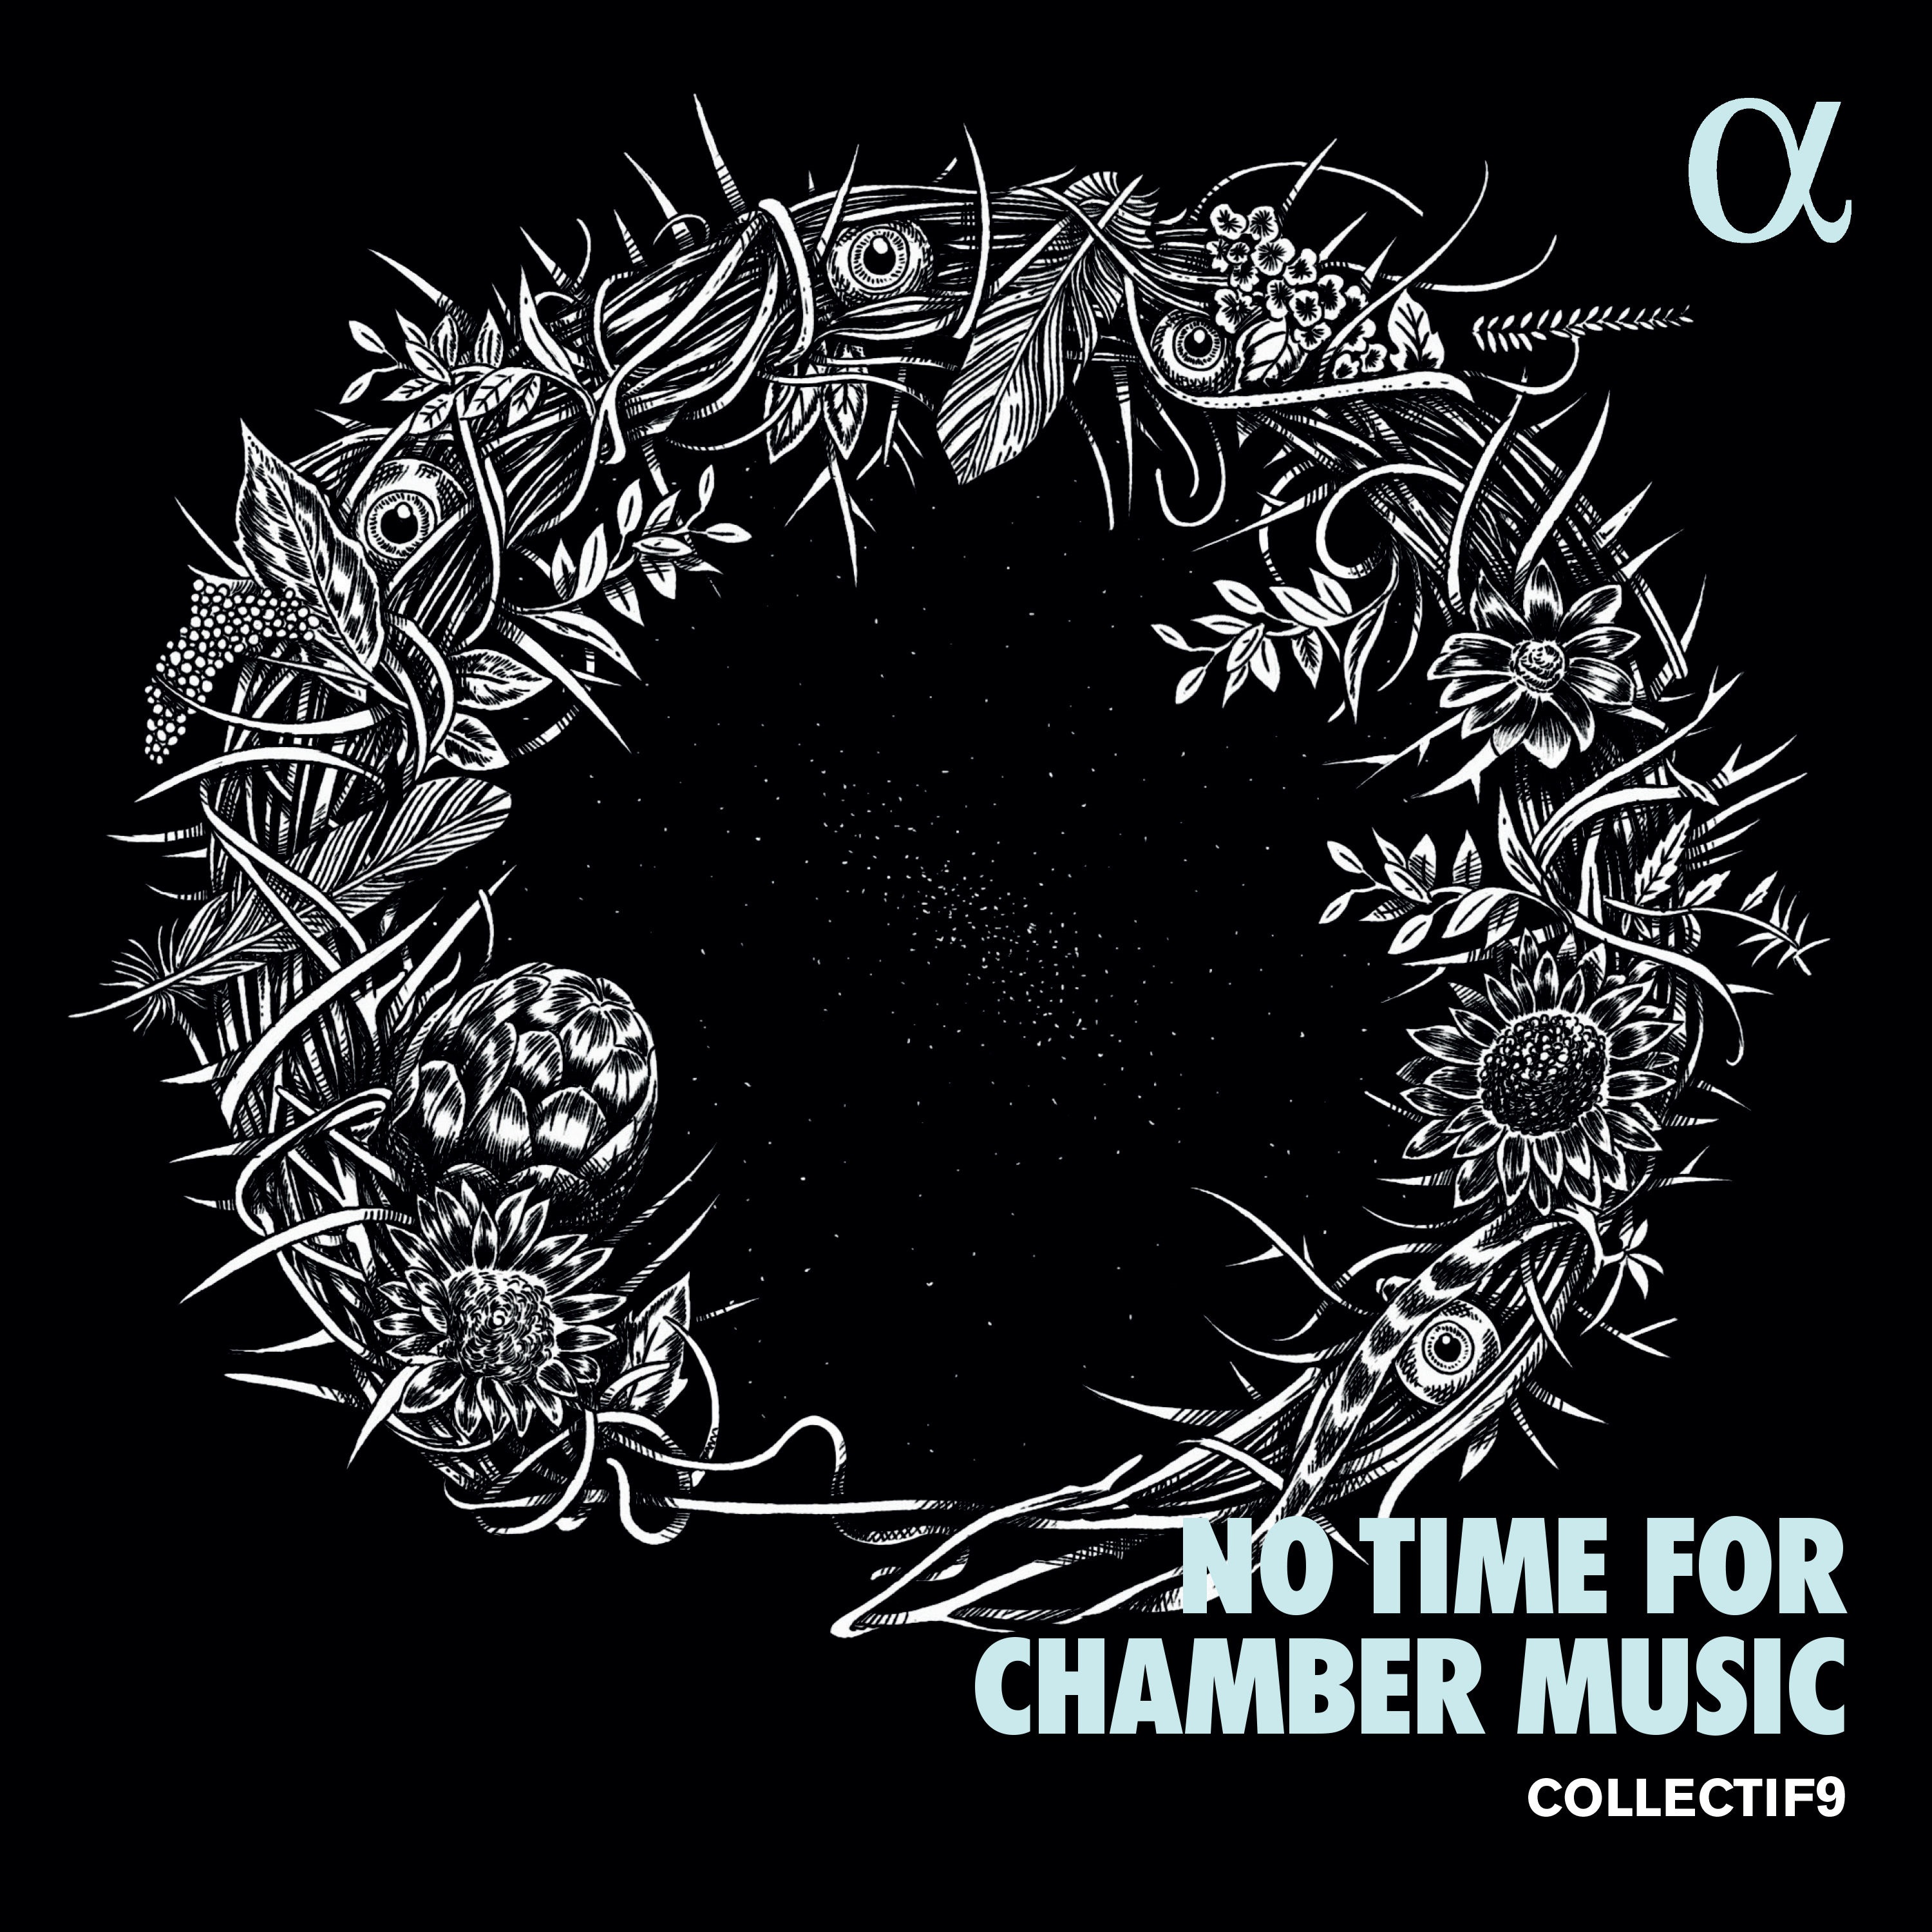 collectif9 - No Time for Chamber Music (2021) [FLAC 24bit/96kHz]